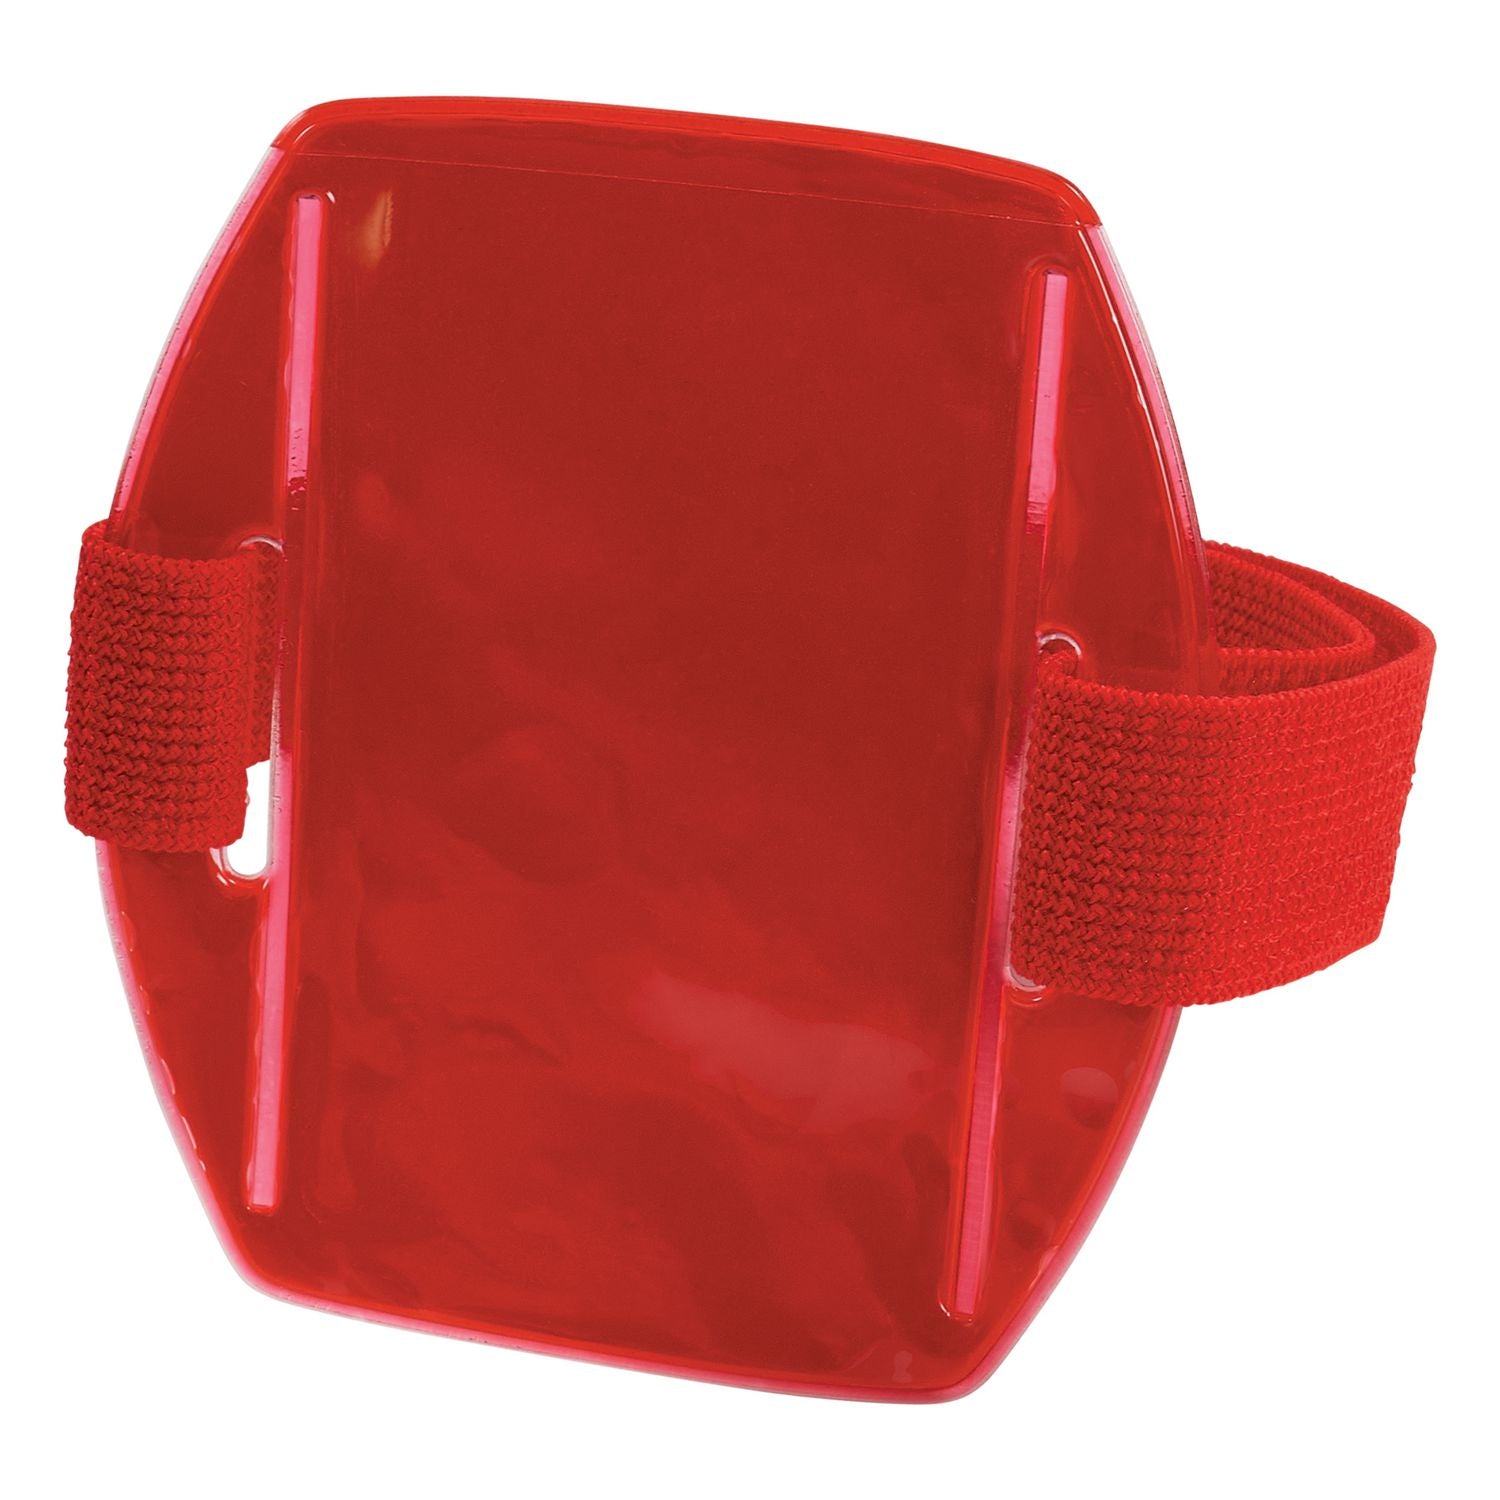 squids-3386-arm-band-id-badge-holder-vertical-hi-vis-lime-375-x-425-for-25-x-4-insert-10-pack-ships-in-1-3-bus-days_ego19974 - 1